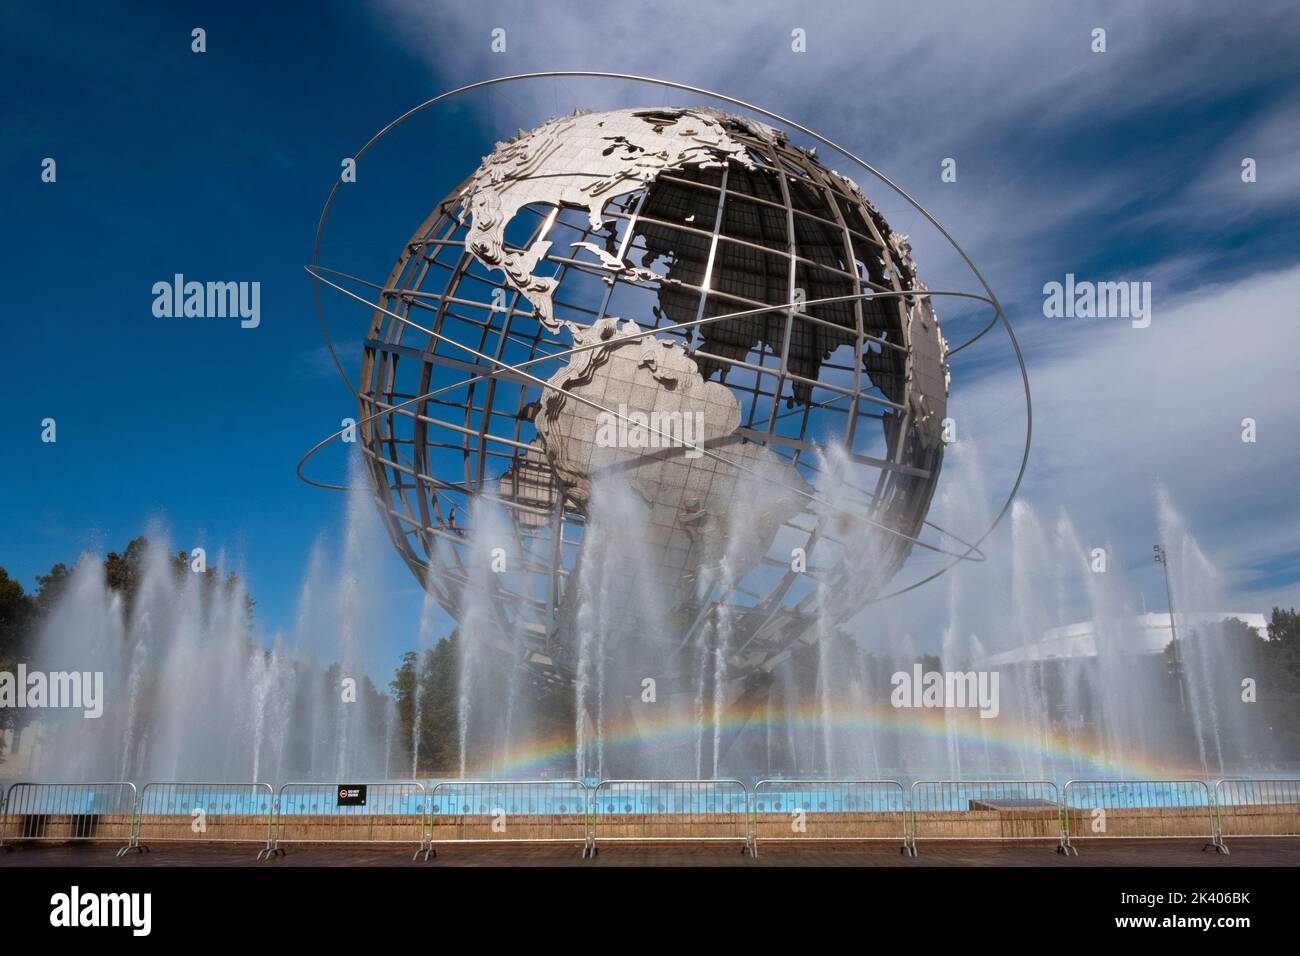 A visible rainbow seen in the fountains surrounding the Unisphere in Flushing Meadows Corona Park in Queens, New York City. Stock Photo